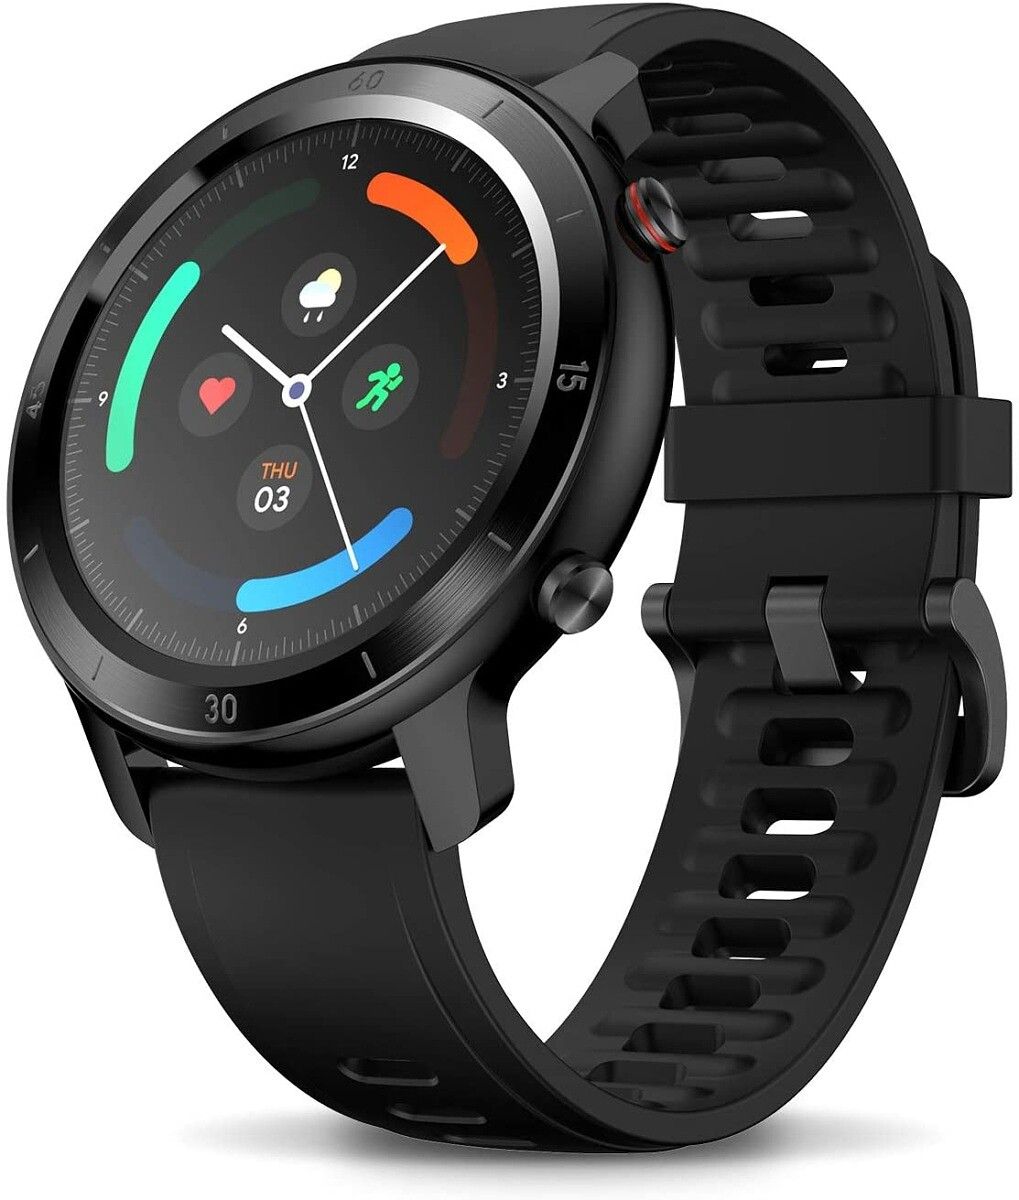 If you're looking for a simple smartwatch that gets the basic job done, then you'll want the TicWatch GTX. Normally $60, you can clip the coupon the page to get this for $48!